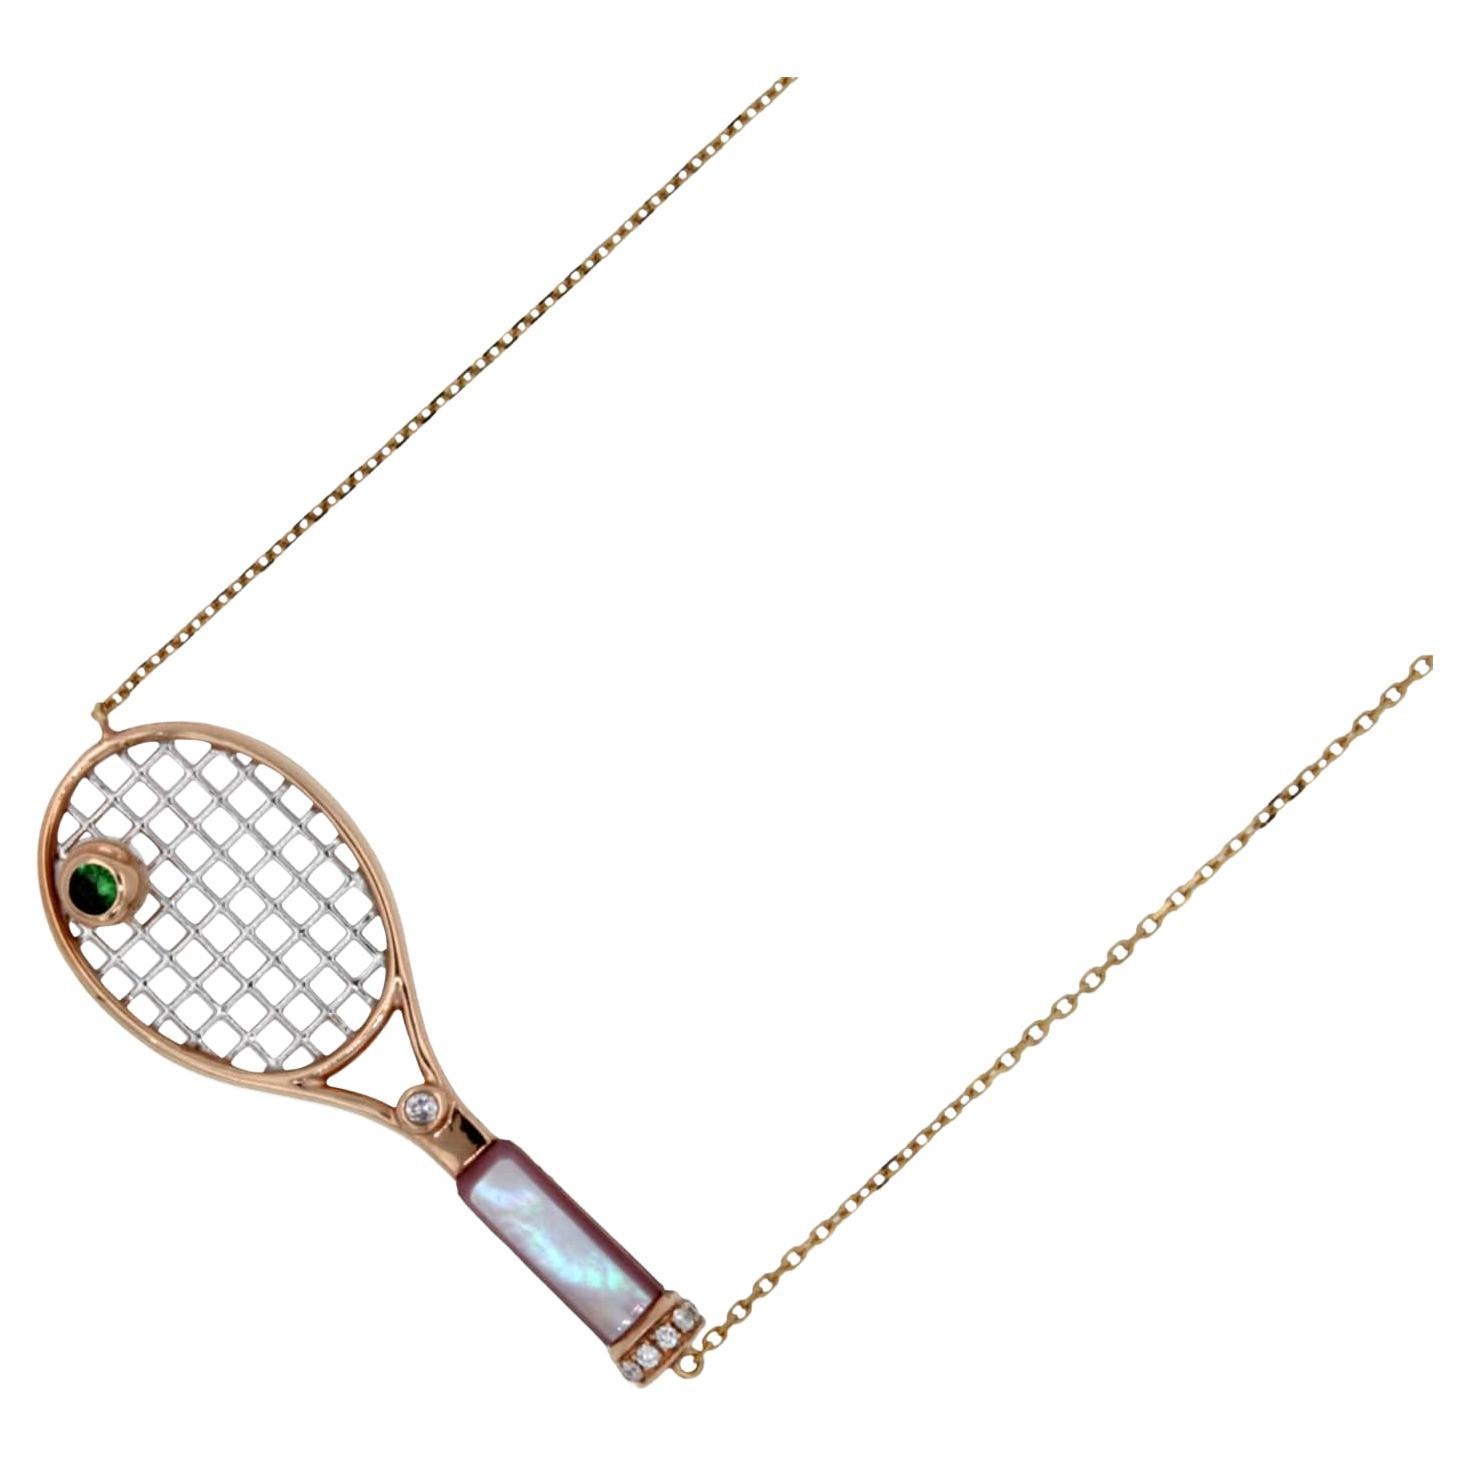 18K Rose Gold
Pink Mother of Pearl Gemstone Handle
Green Emerald Tennis Ball Gemstone
0.25 cts Diamonds
Approximate Ace Racket Length: 1.77” inches / 4.5 centimeters
16-18 inches Diamond-Cut Link Cable adjustable chain length
In-Stock
This is part